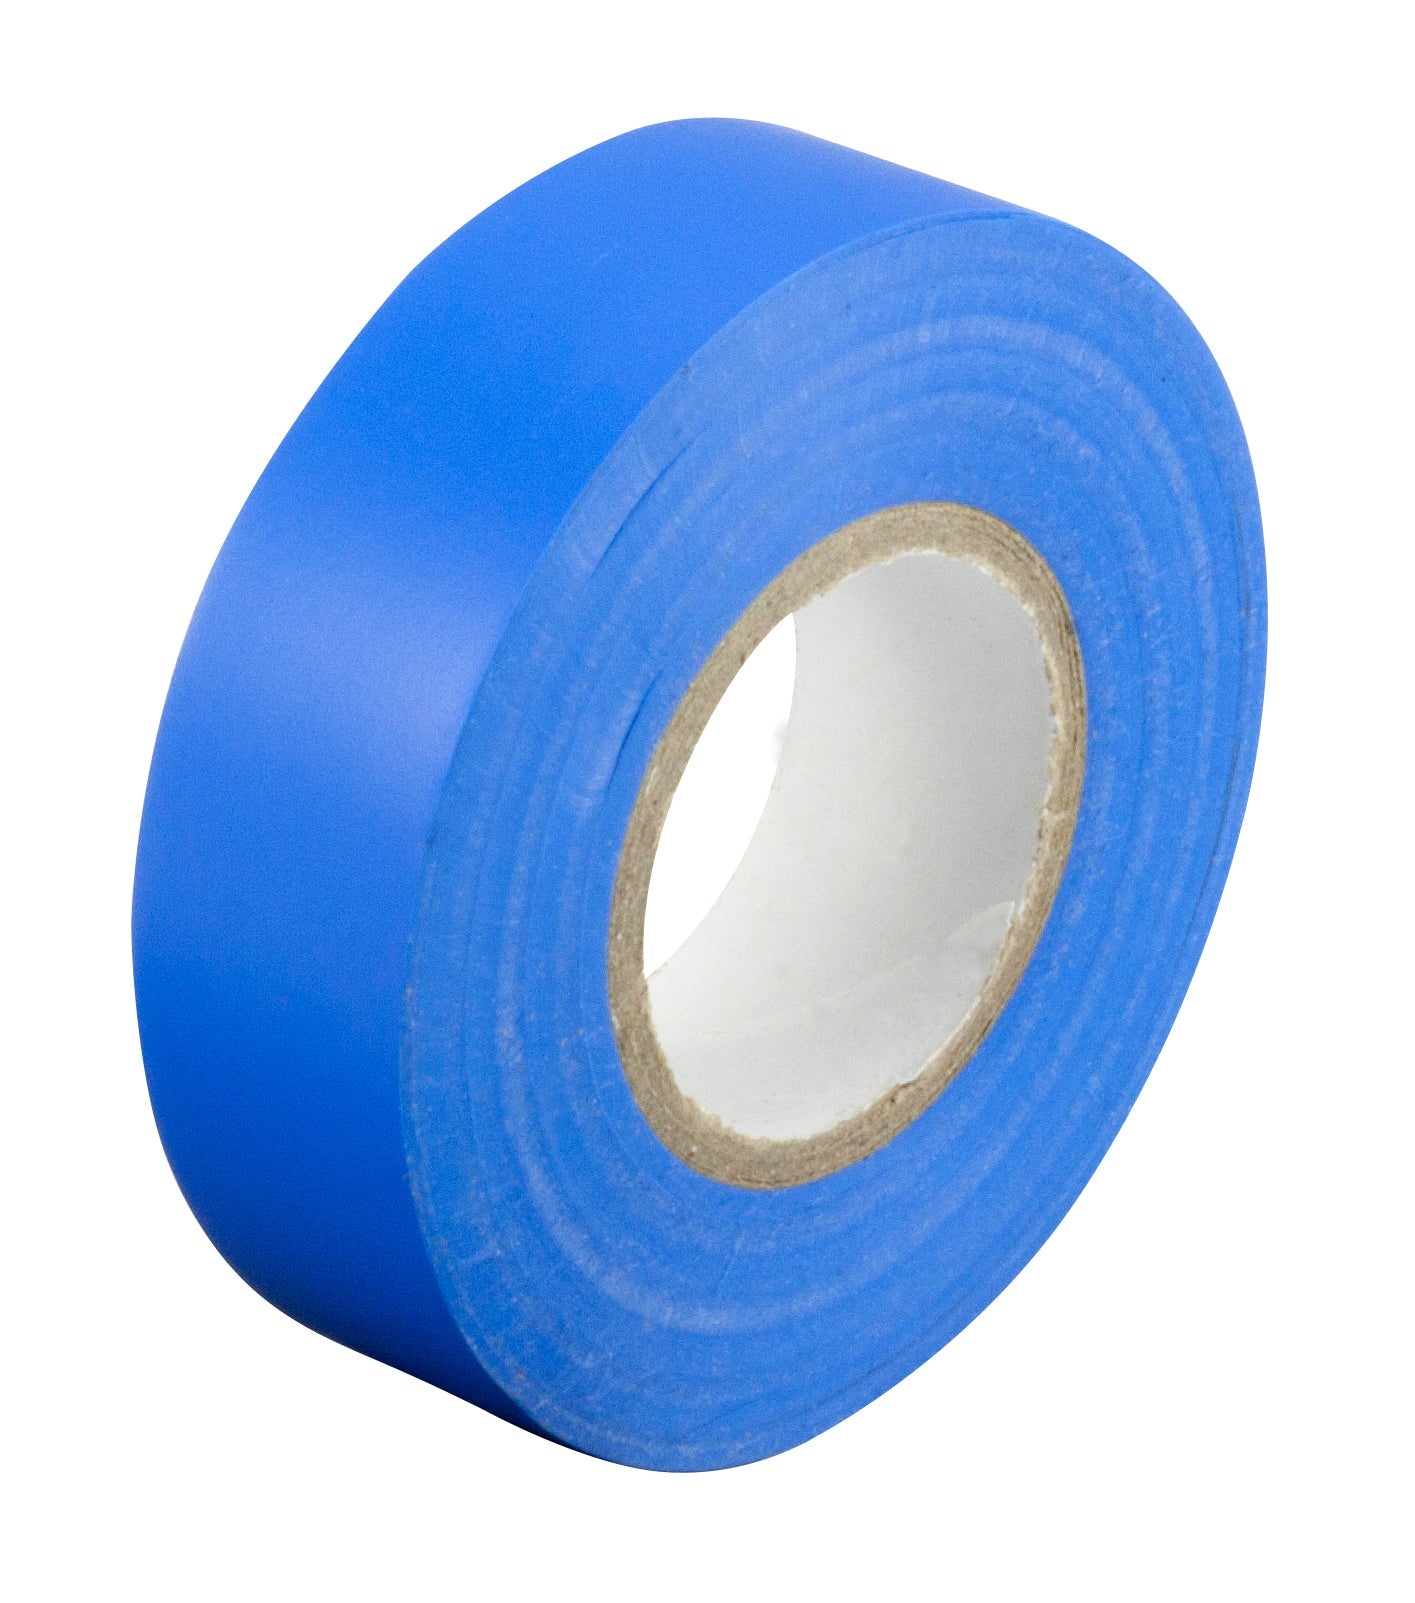 PVC Tape Size: 19mmx20m Roll - Blue - Pack of 10